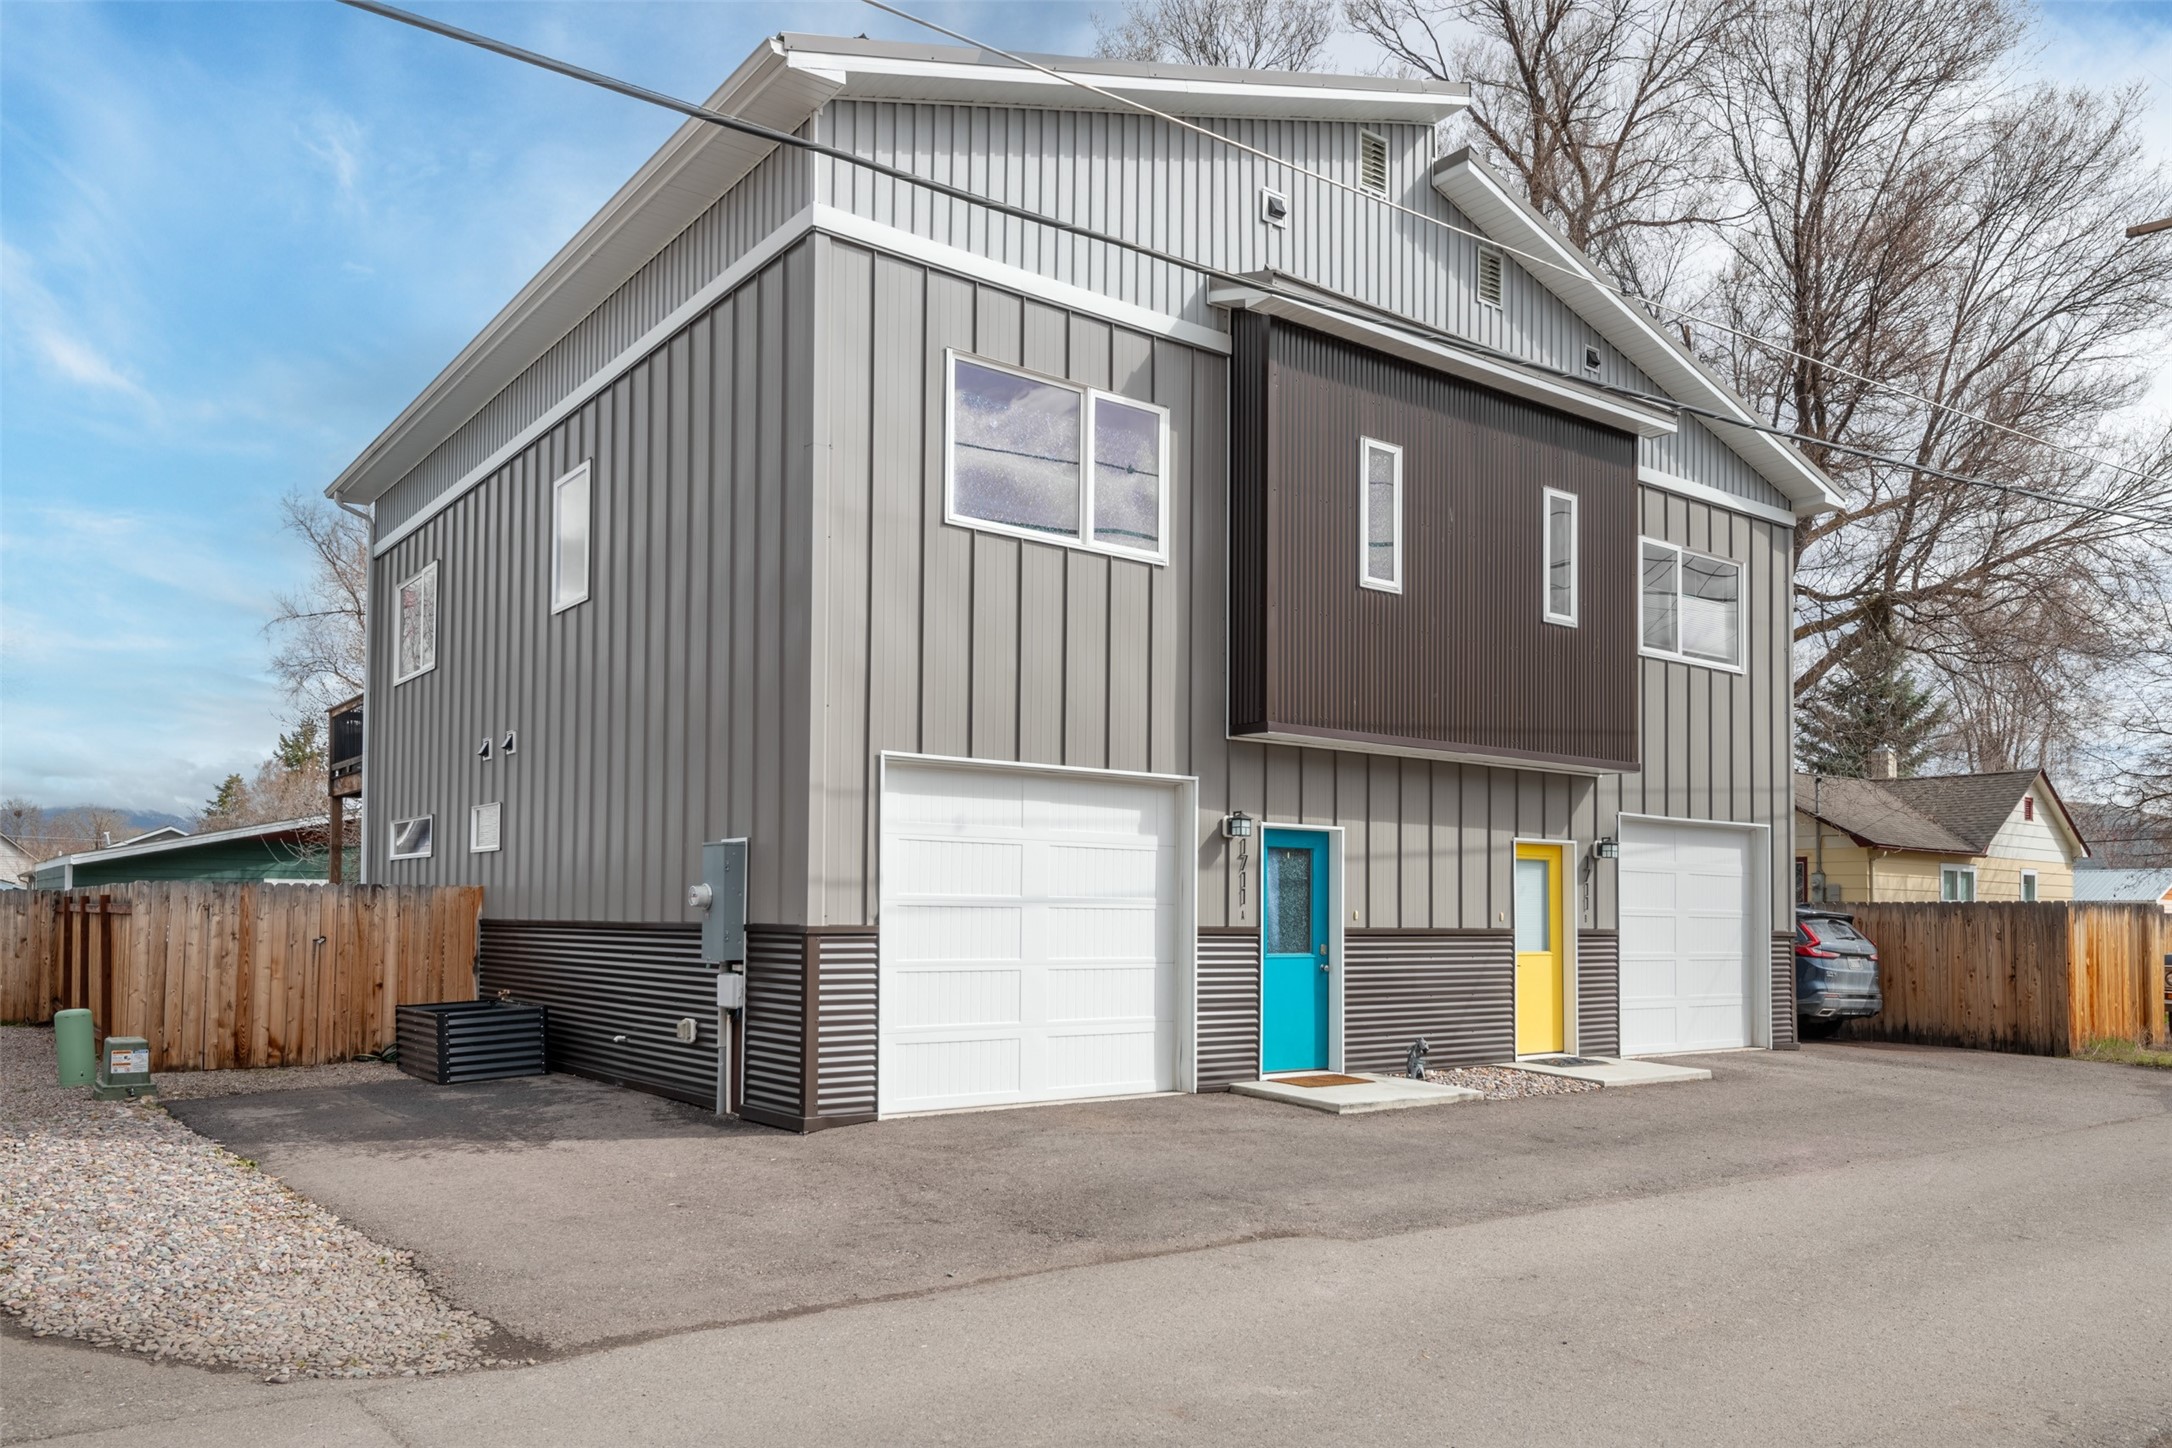 NOW OFFERING $2500 BUYER CLOSING COST CREDIT IF UNDER CONTRACT BY 5/1! This 2018-built alley townhouse boasts 3 bedrooms, 2 full bathrooms, an upper level deck, and a small fenced yard, offering the perfect blend of comfort and ease. Features include lofty 10-ft ceilings, a large main-level primary suite, plus 2 bedrooms and a full bathroom upstairs. The open-concept kitchen boasts quartz counters, tile backsplash, stainless steel appliances, and mountain views. Enjoy sunny days grilling & relaxing on your 2nd floor balcony & make use of the small fenced yard for pets or gardening. With light covenants, no HOA dues, short-term rentals permitted, all electric appliances, mini split-based HVAC, and low-maintenance metal roof/siding, this home offers hassle-free living. The deep 1-car garage provides room for your car and all your gear. Located in the vibrant Franklin to the Fort neighborhood, with easy access to public transportation, the Milwaukee trail, downtown, and entertainment. This duplex townhome was designed by architect NC Design Studio and completed in 2018. The primary suite is large enough for a sitting area in addition to a king sized bed, and is situated to the rear of the main level, with backyard access. A laundry area with a stacked washer and dryer is tucked under the stairs on the main level. The second level living/dining/kitchen area is above the surrounding rooftops, among the greenery of the trees, giving owners privacy and views of the surrounding mountains. The one shared wall is well-insulated, as well as being along the stairway wall, and the current owners and neighbors report little to no noise transfer.